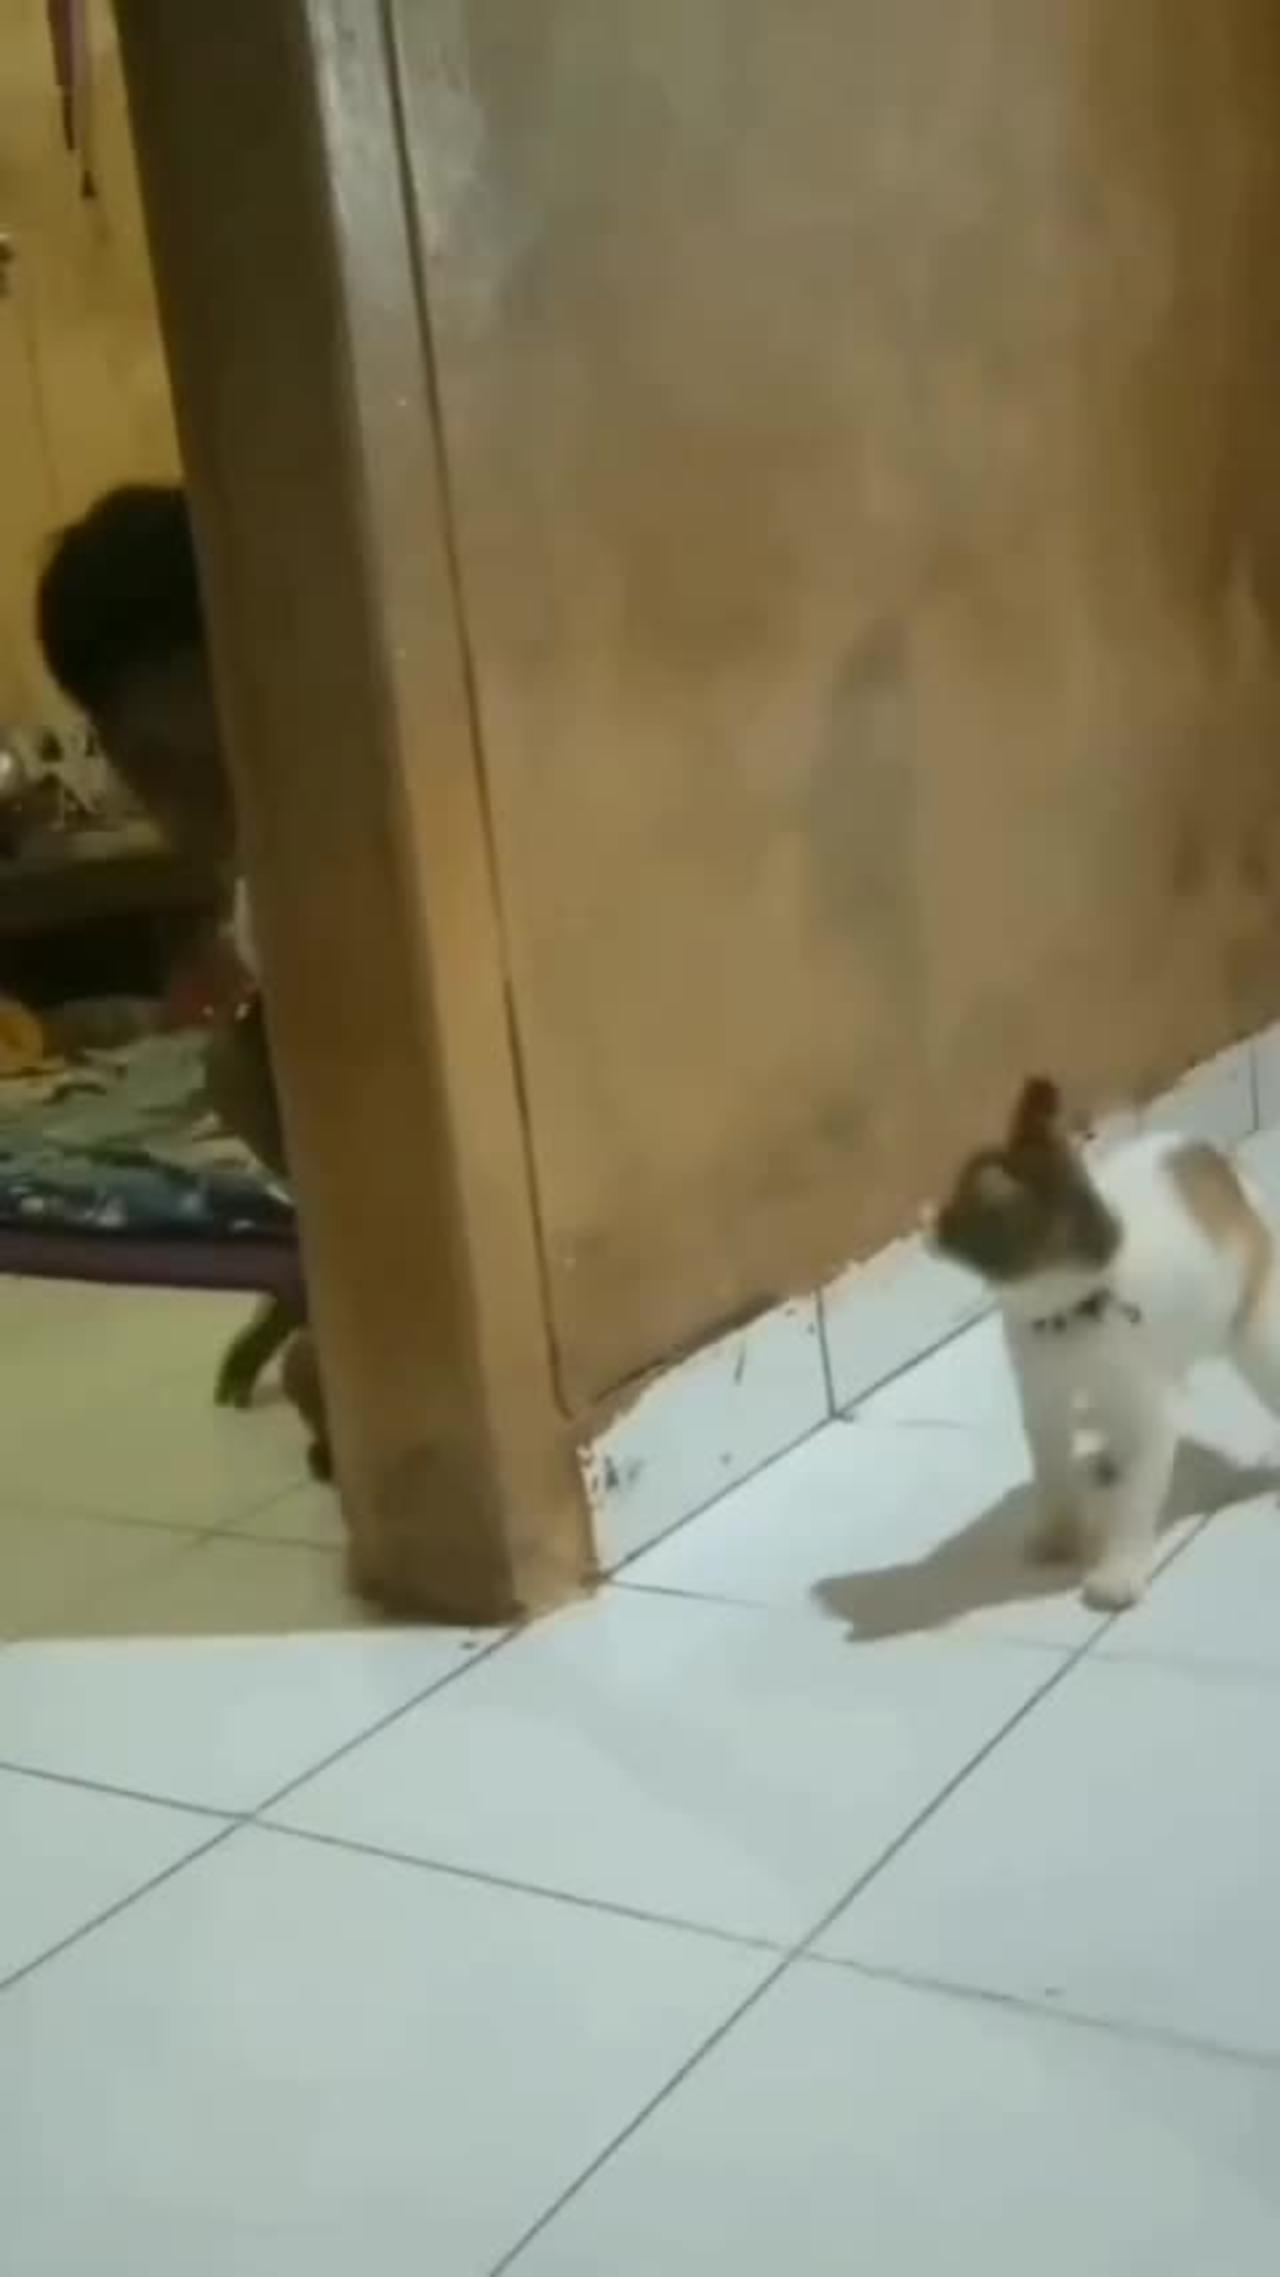 Child boy and little cat playing in room.